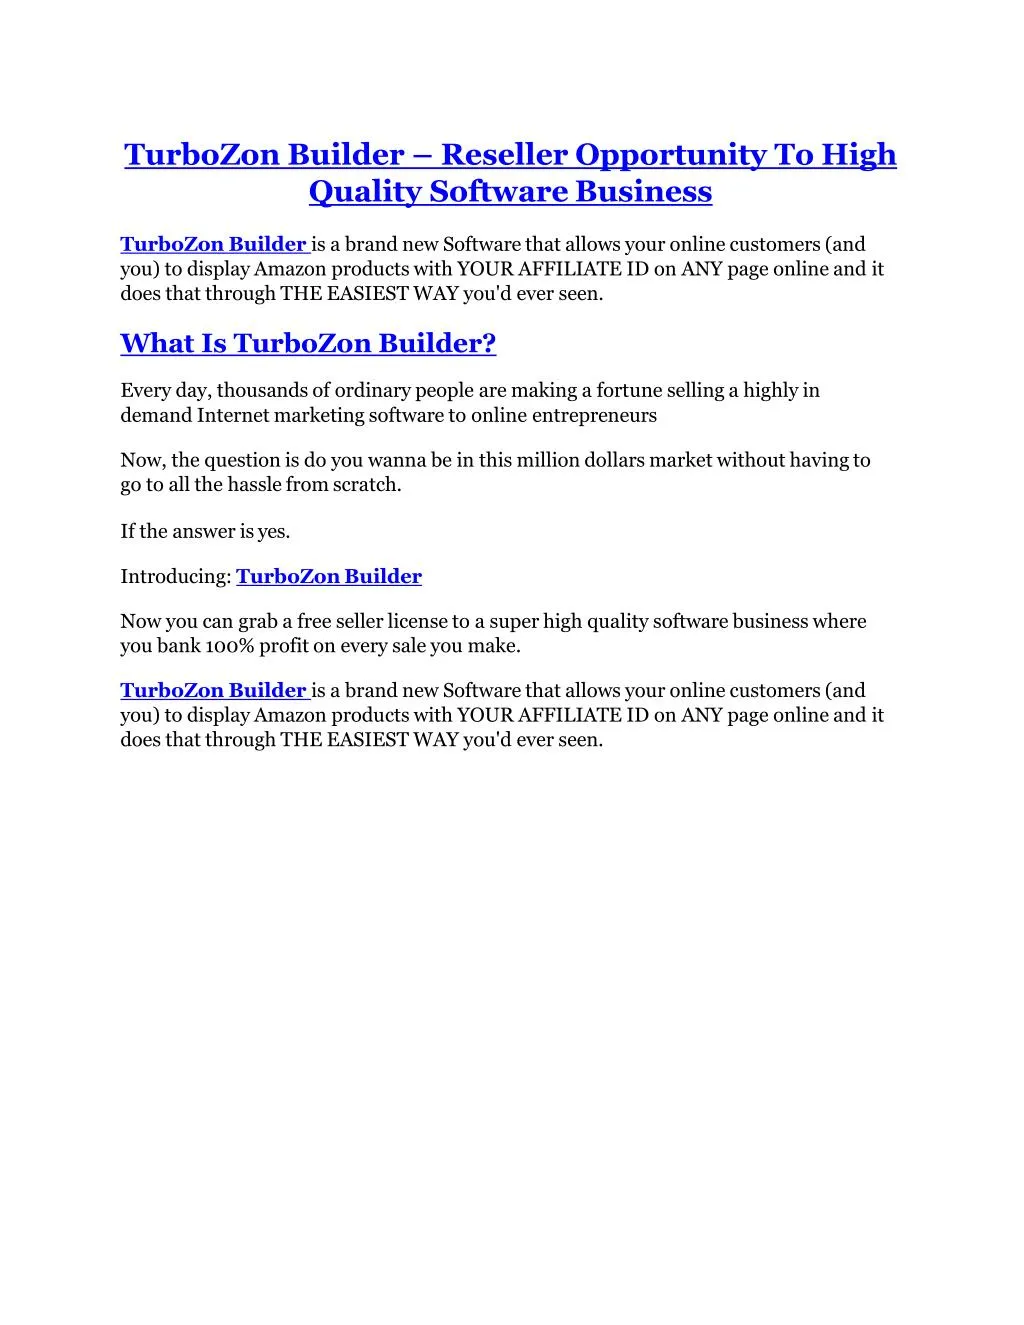 turbozon builder reseller opportunity to high